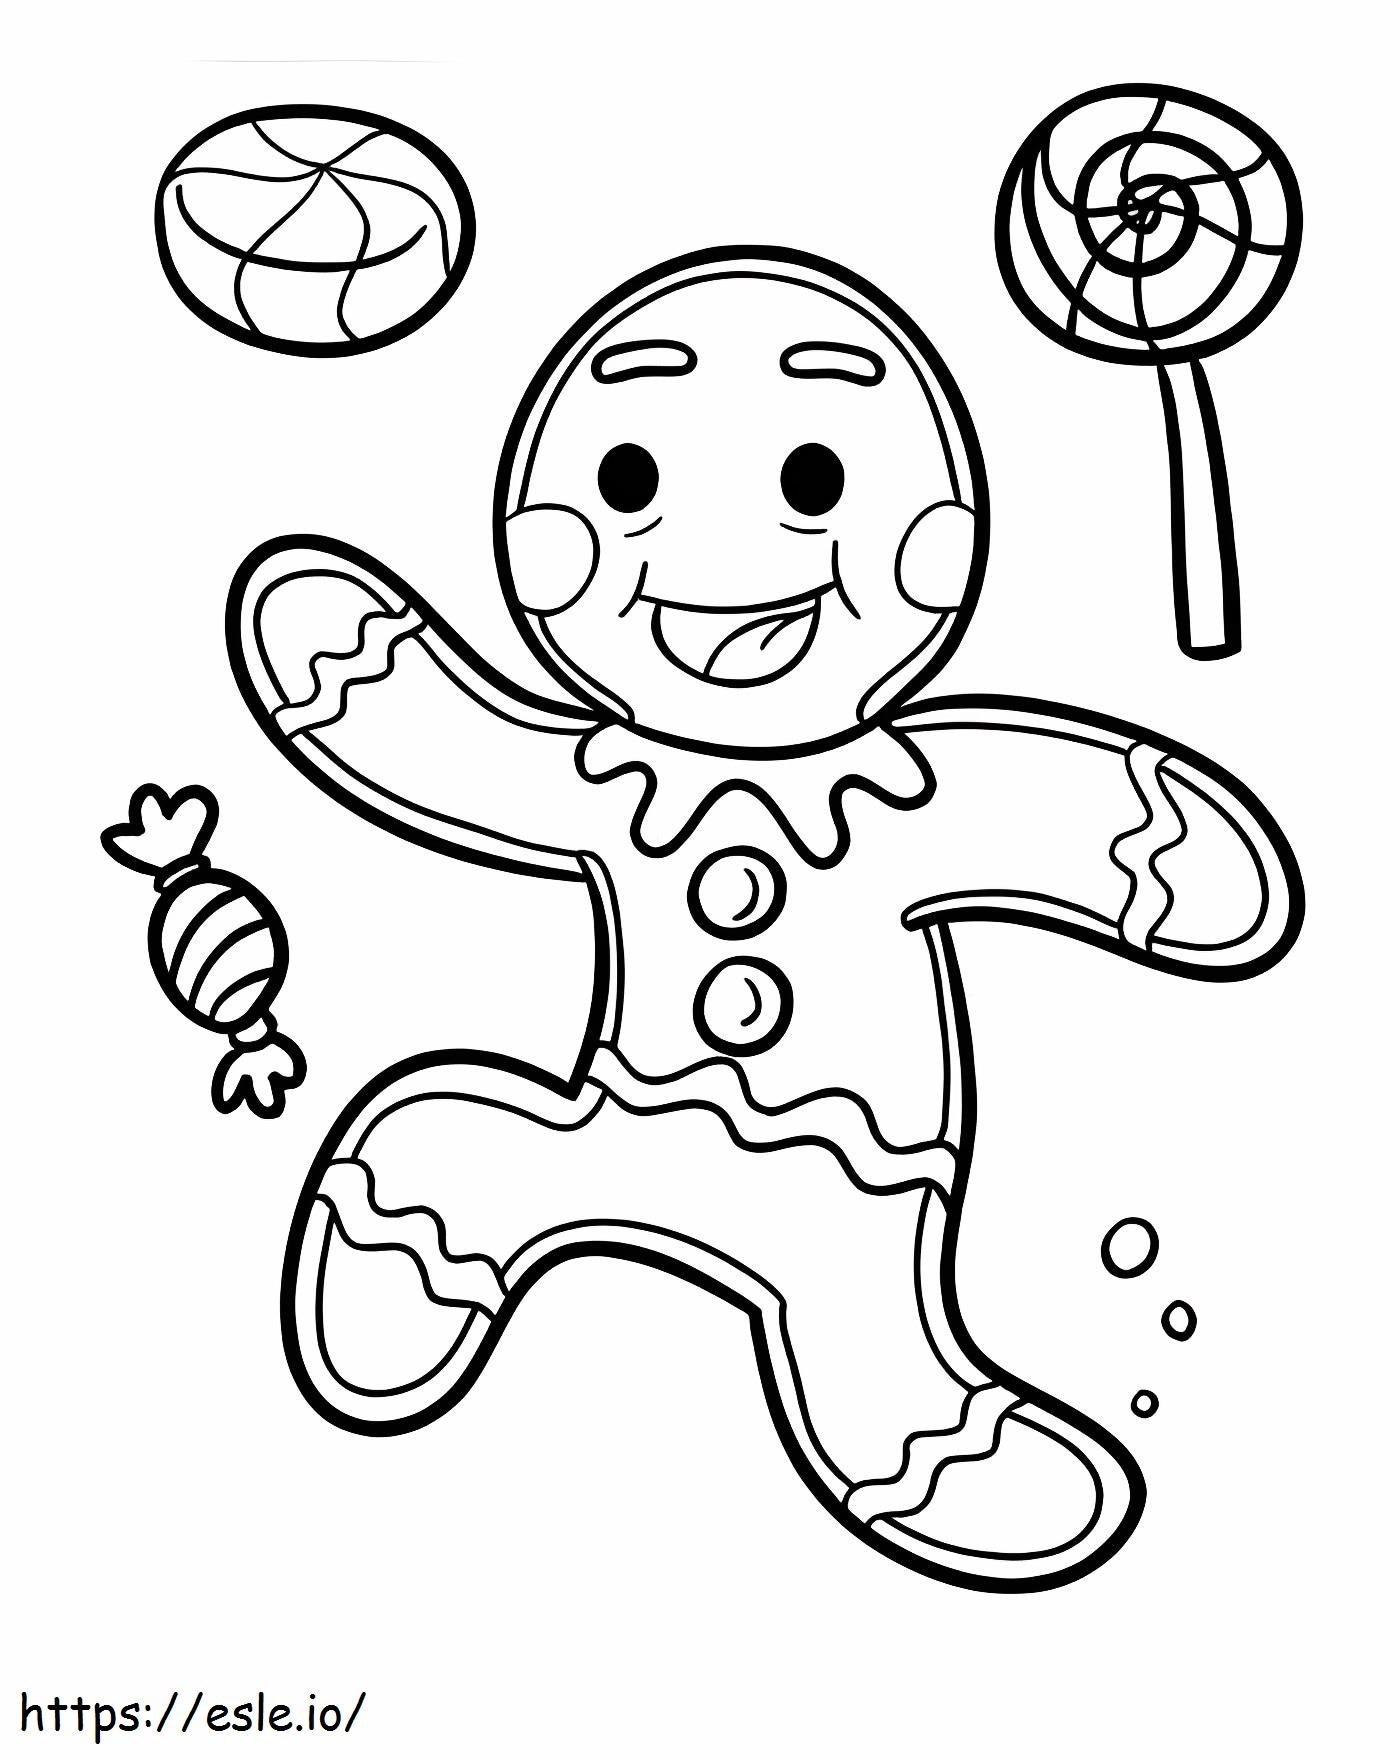 Gingerbread Man With Candies coloring page